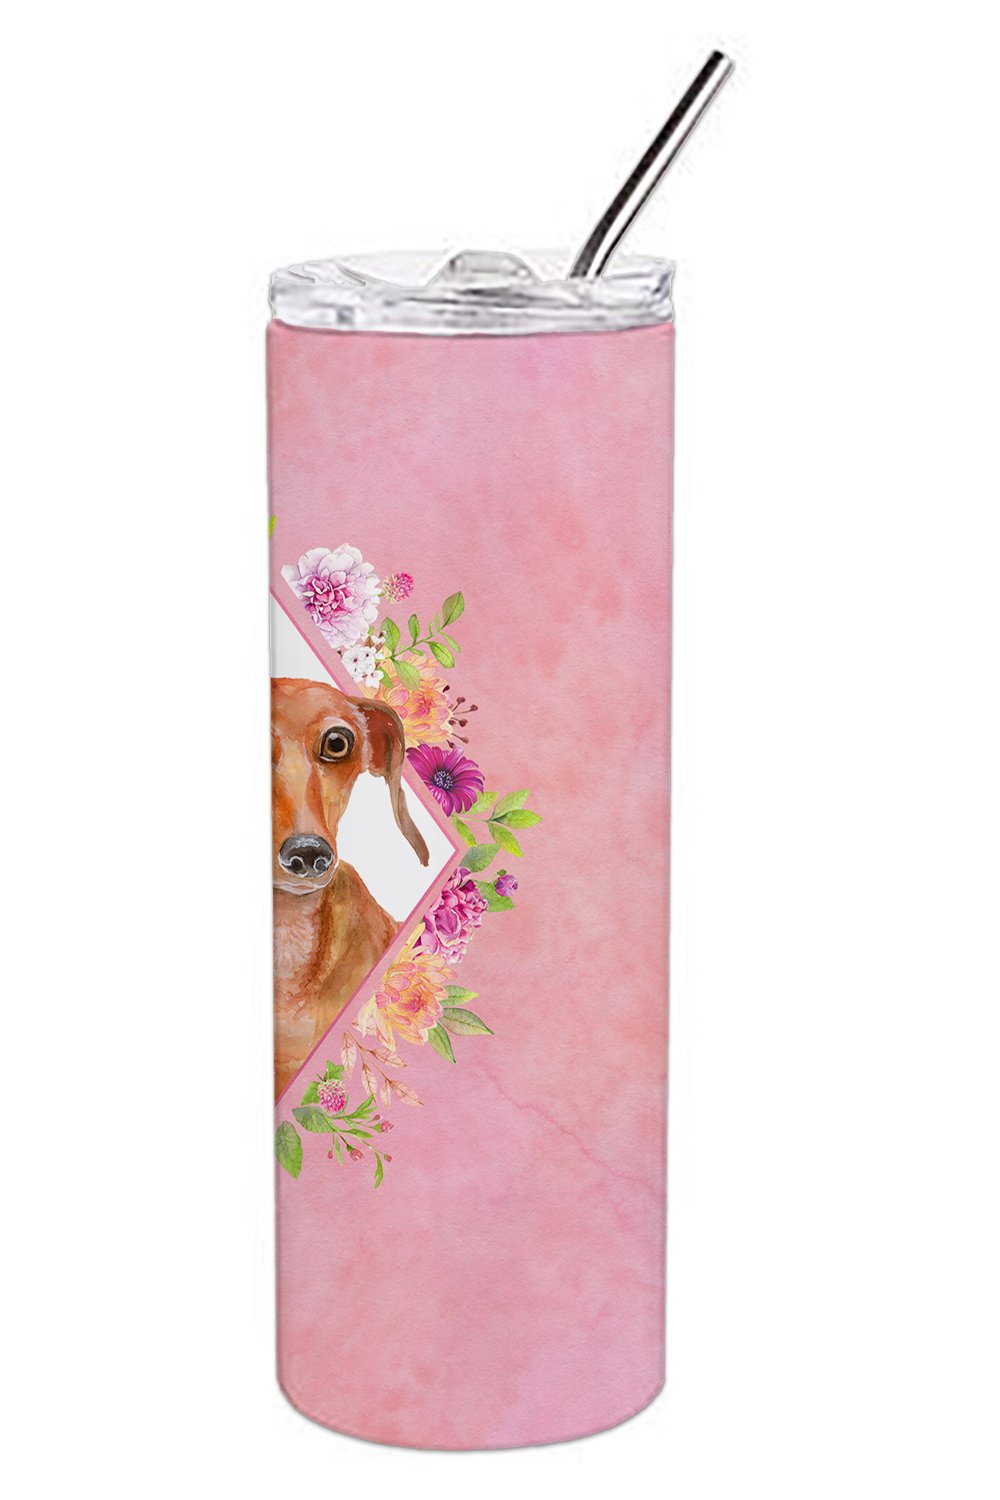 Dachshund Red #2 Pink Flowers Double Walled Stainless Steel 20 oz Skinny Tumbler CK4135TBL20 by Caroline's Treasures